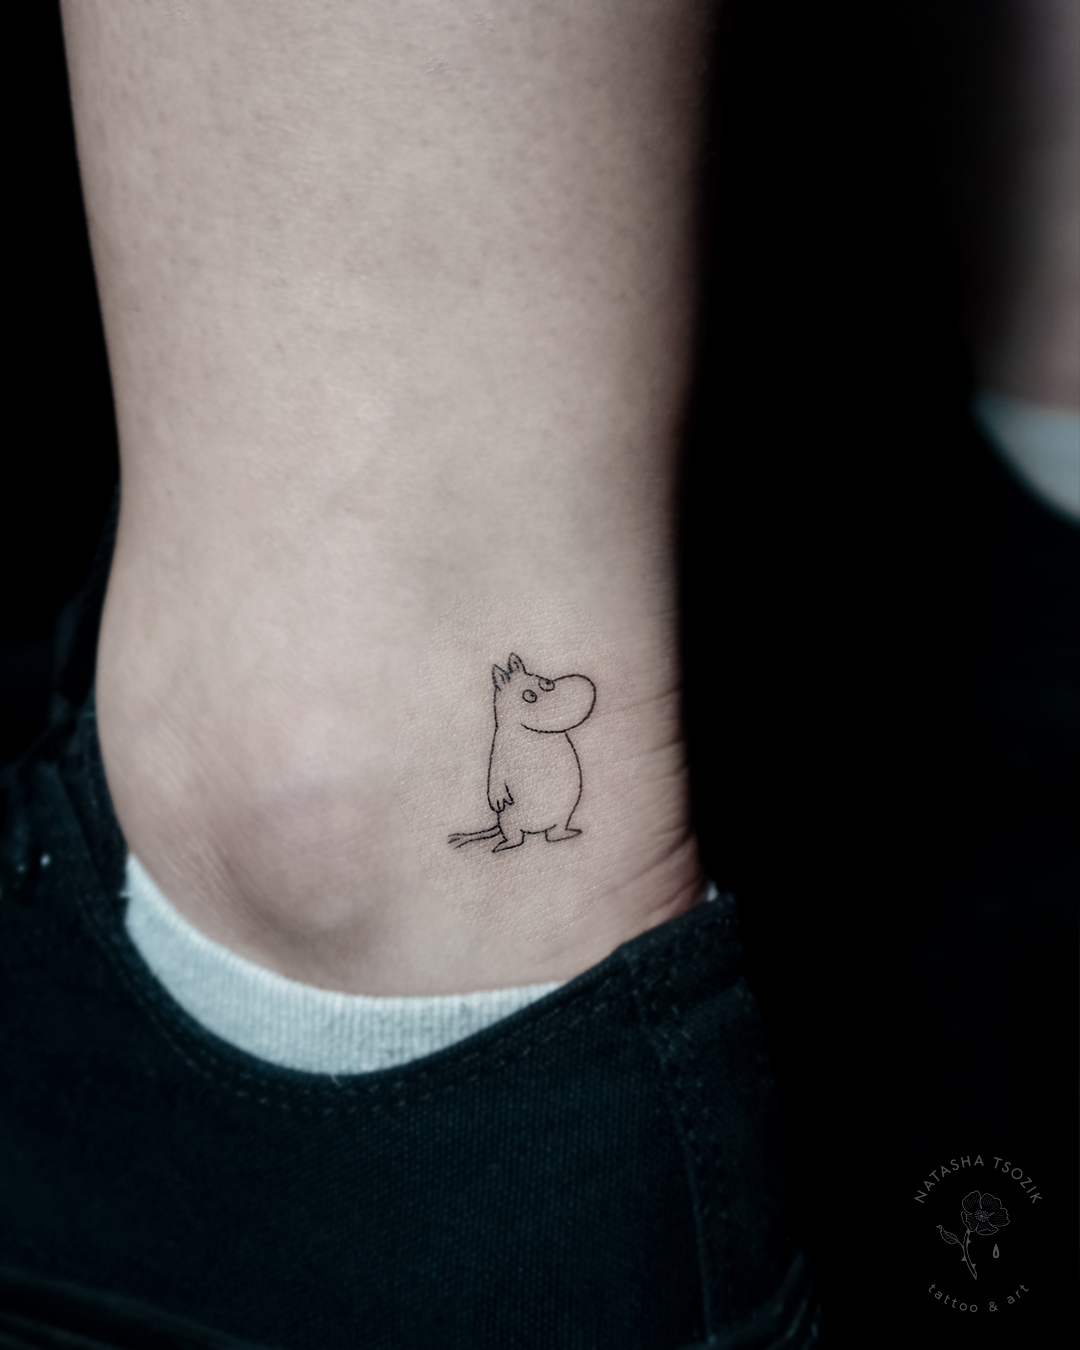 Small Moomin tattoo on ankle.